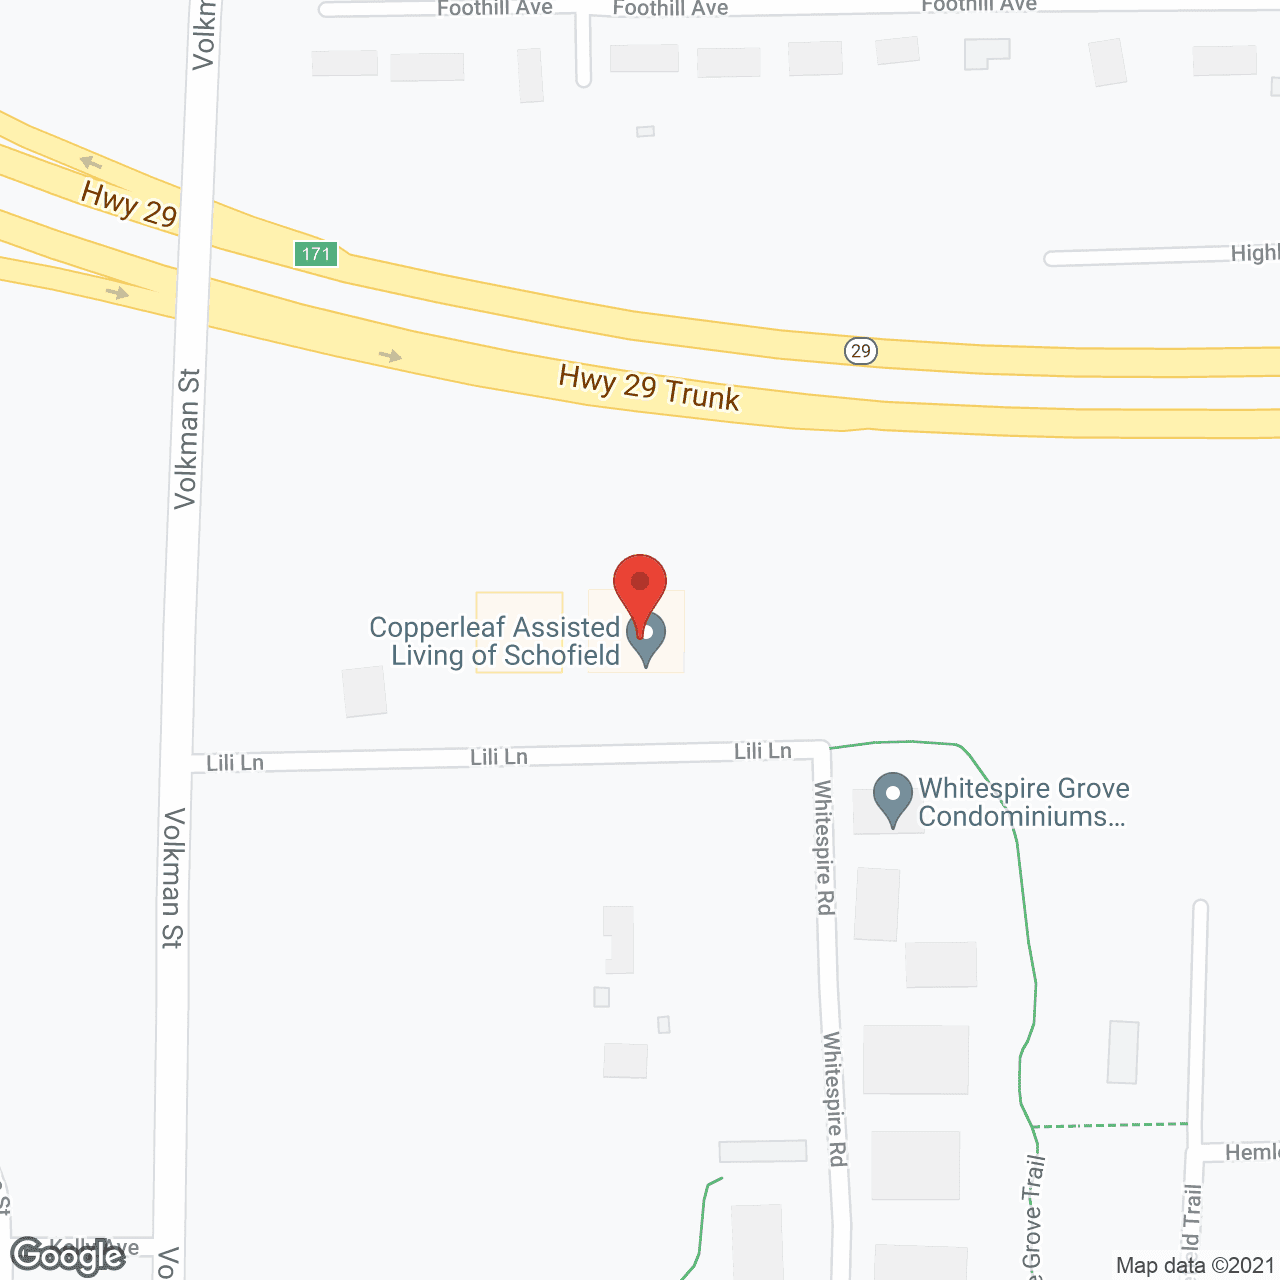 Copperleaf Assisted Living of Schofield in google map